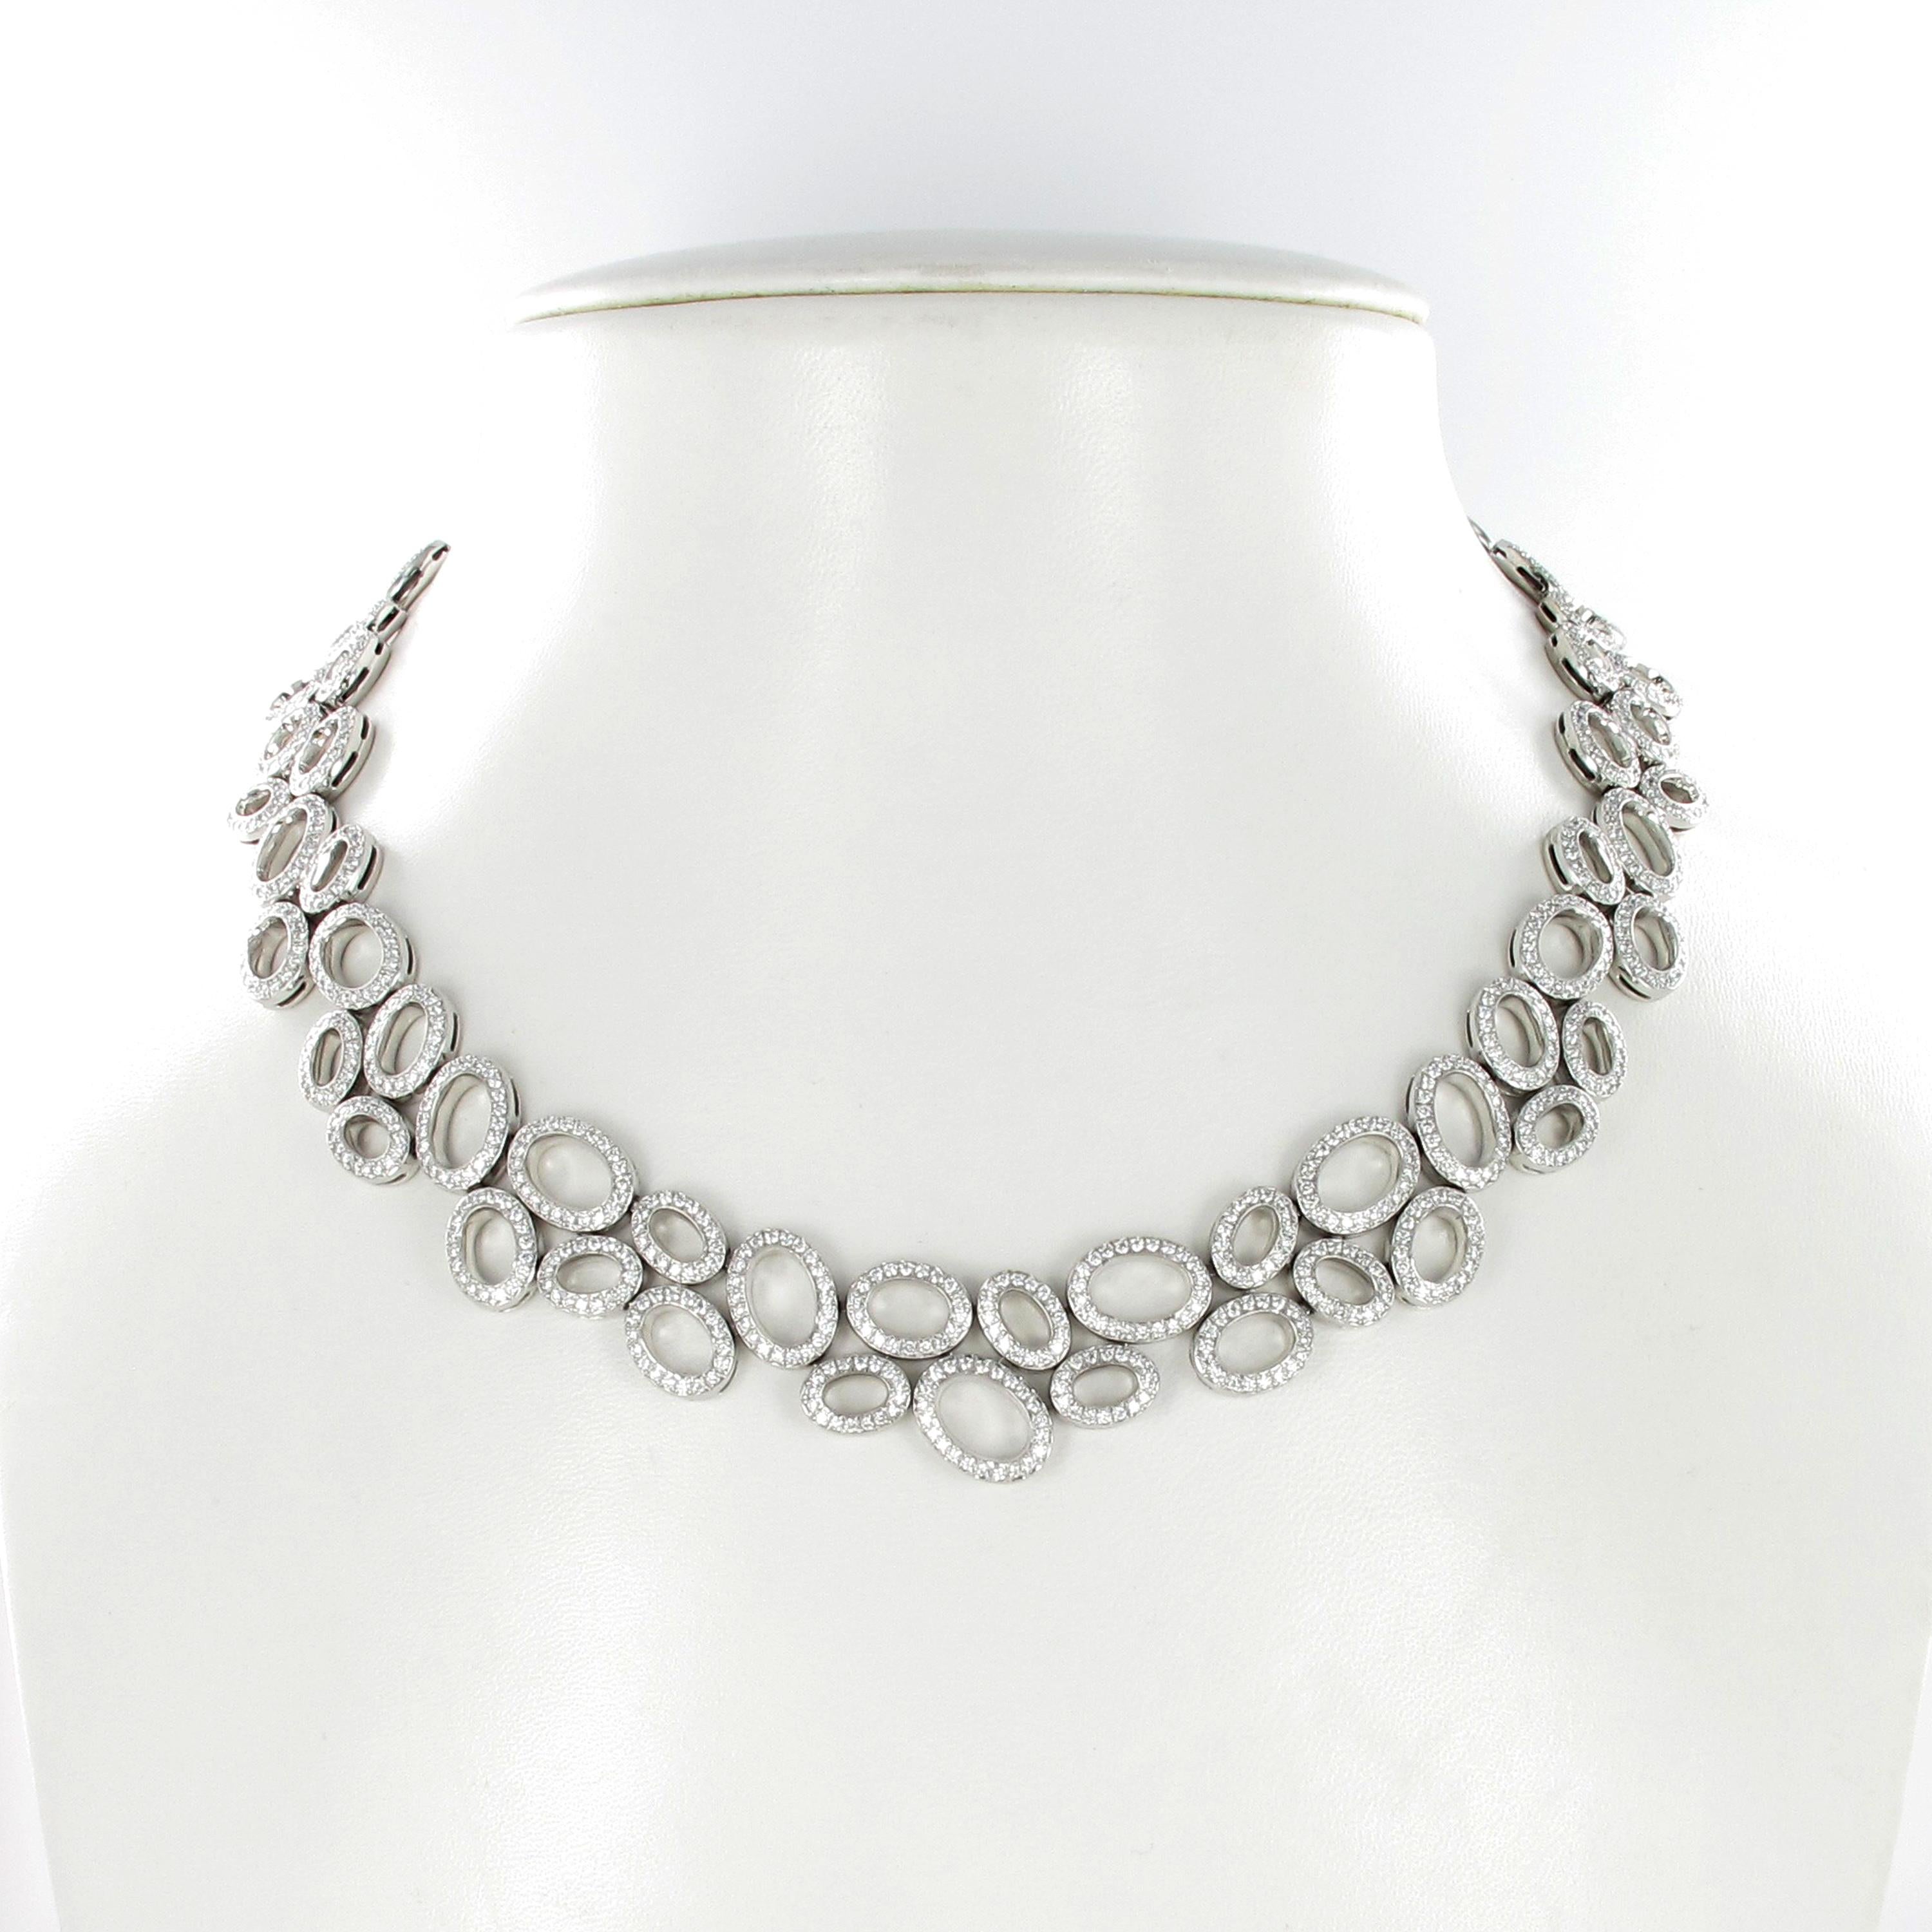 Superb Diamond Necklace in White Gold by Gübelin For Sale 1